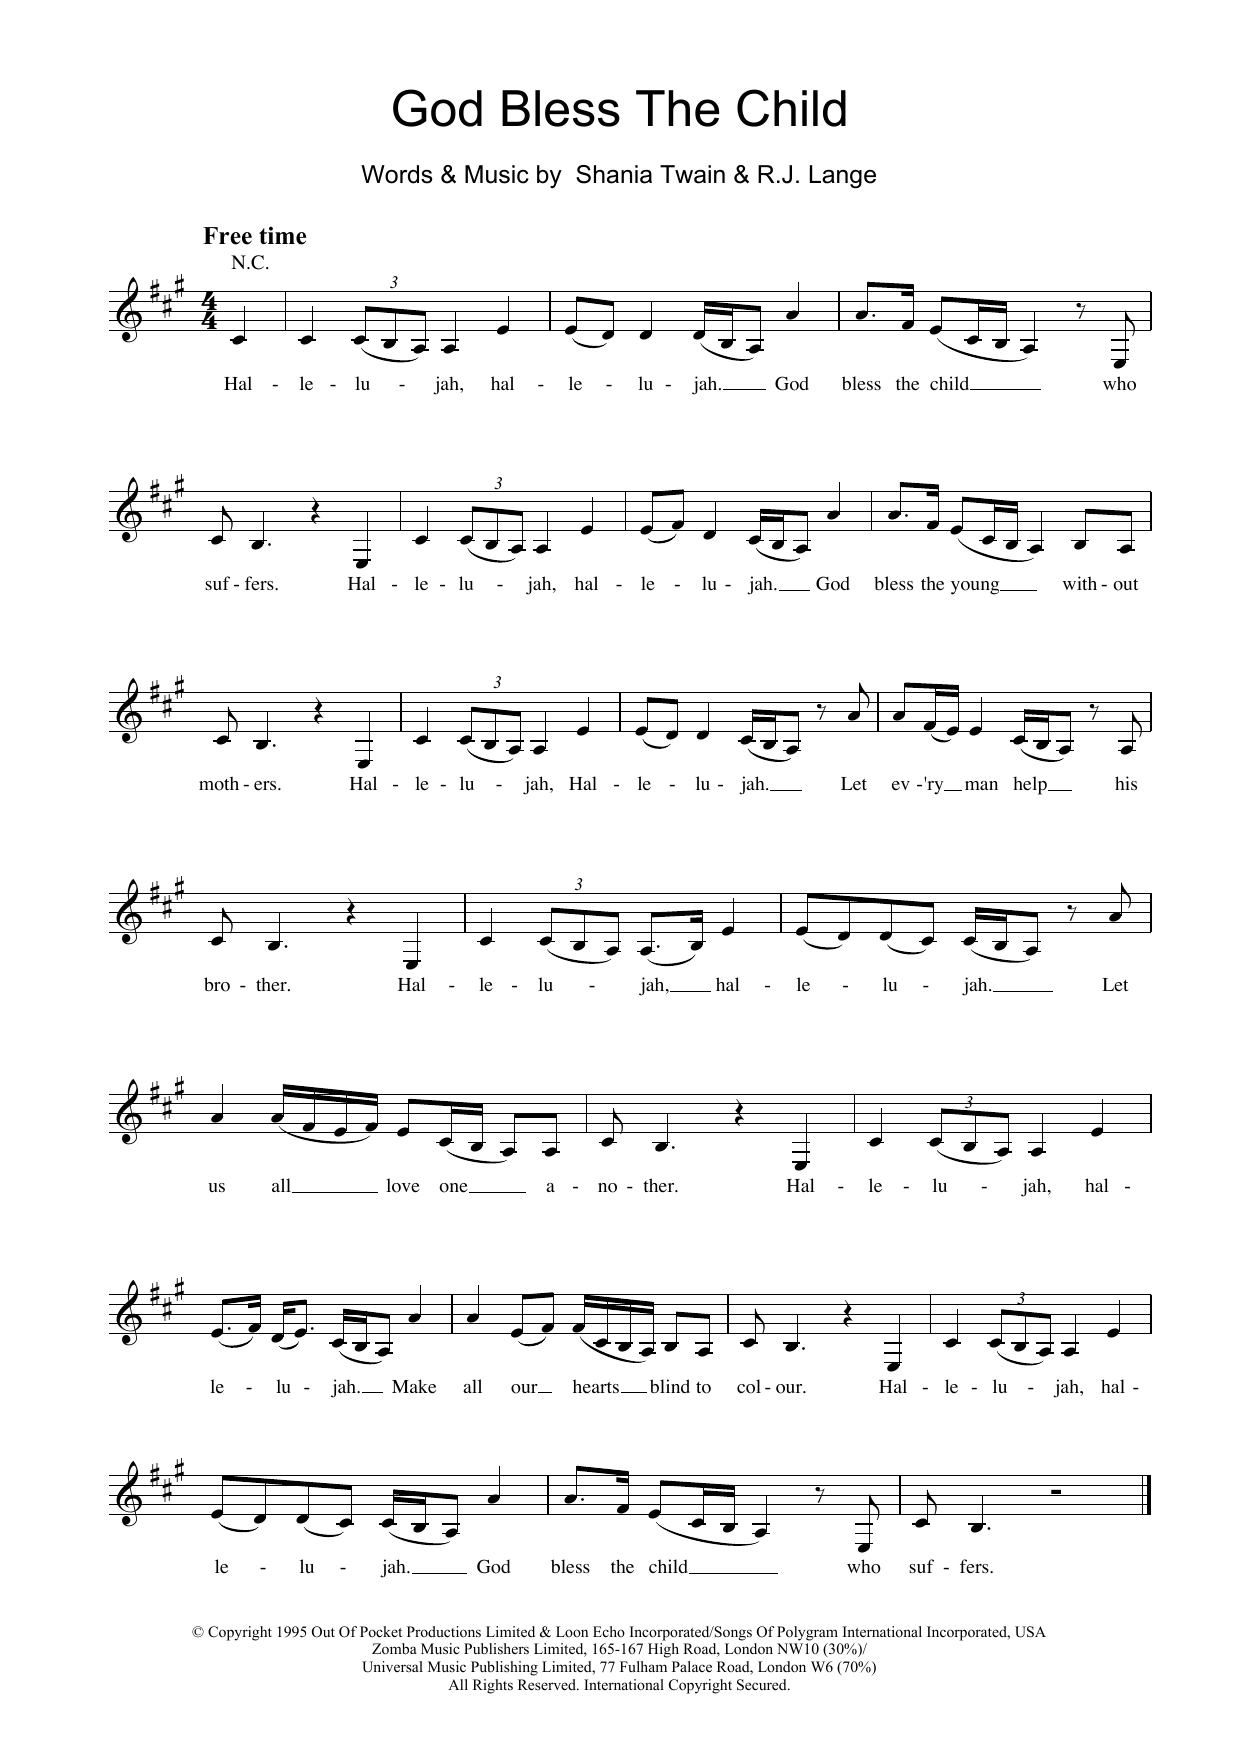 Download Shania Twain God Bless The Child Sheet Music